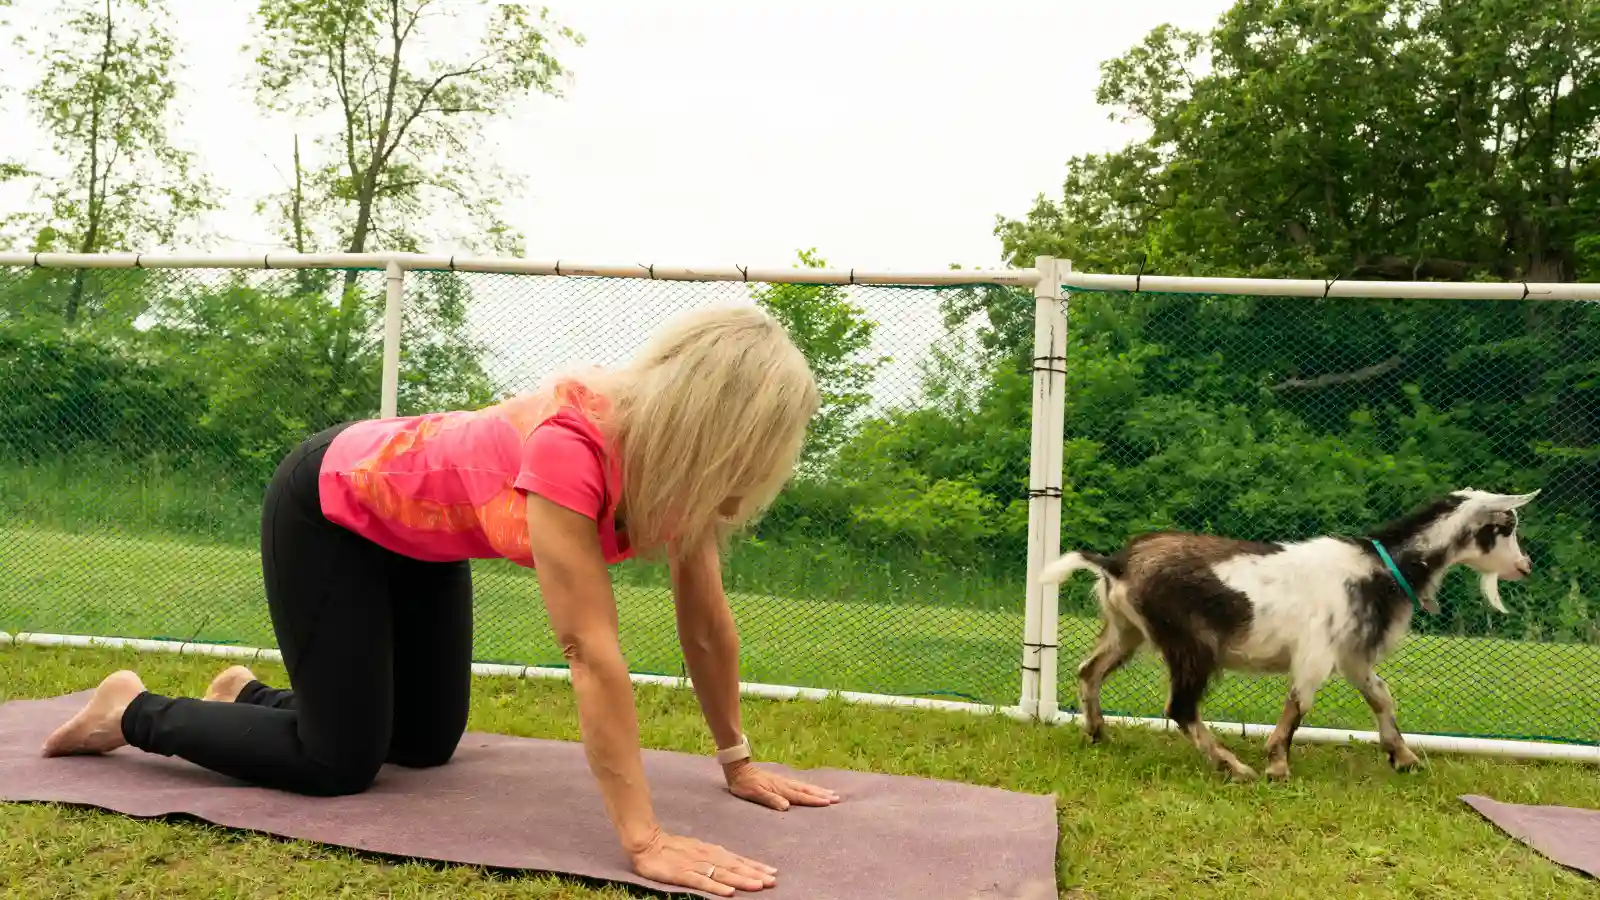 What to Wear to Goat Yoga